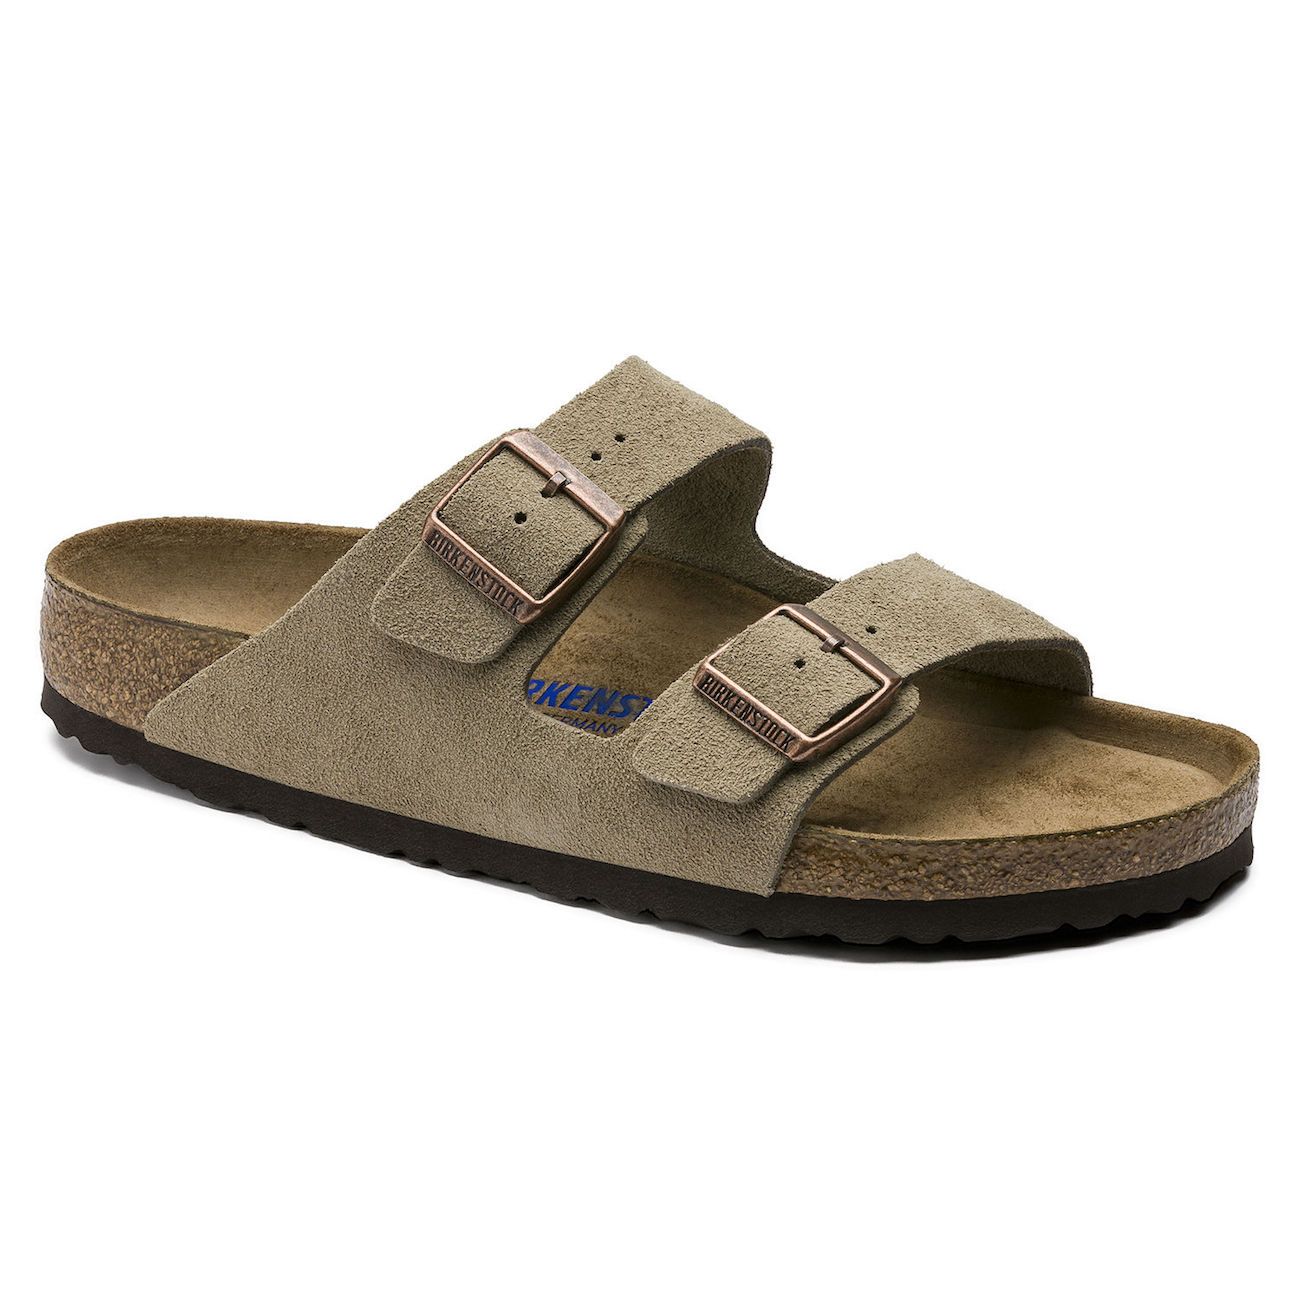 Birkenstock Classic, Arizona, Soft-Footbed, Suede Leather, Regular Fit, Taupe Sandals Birkenstock Classic Taupe 36 